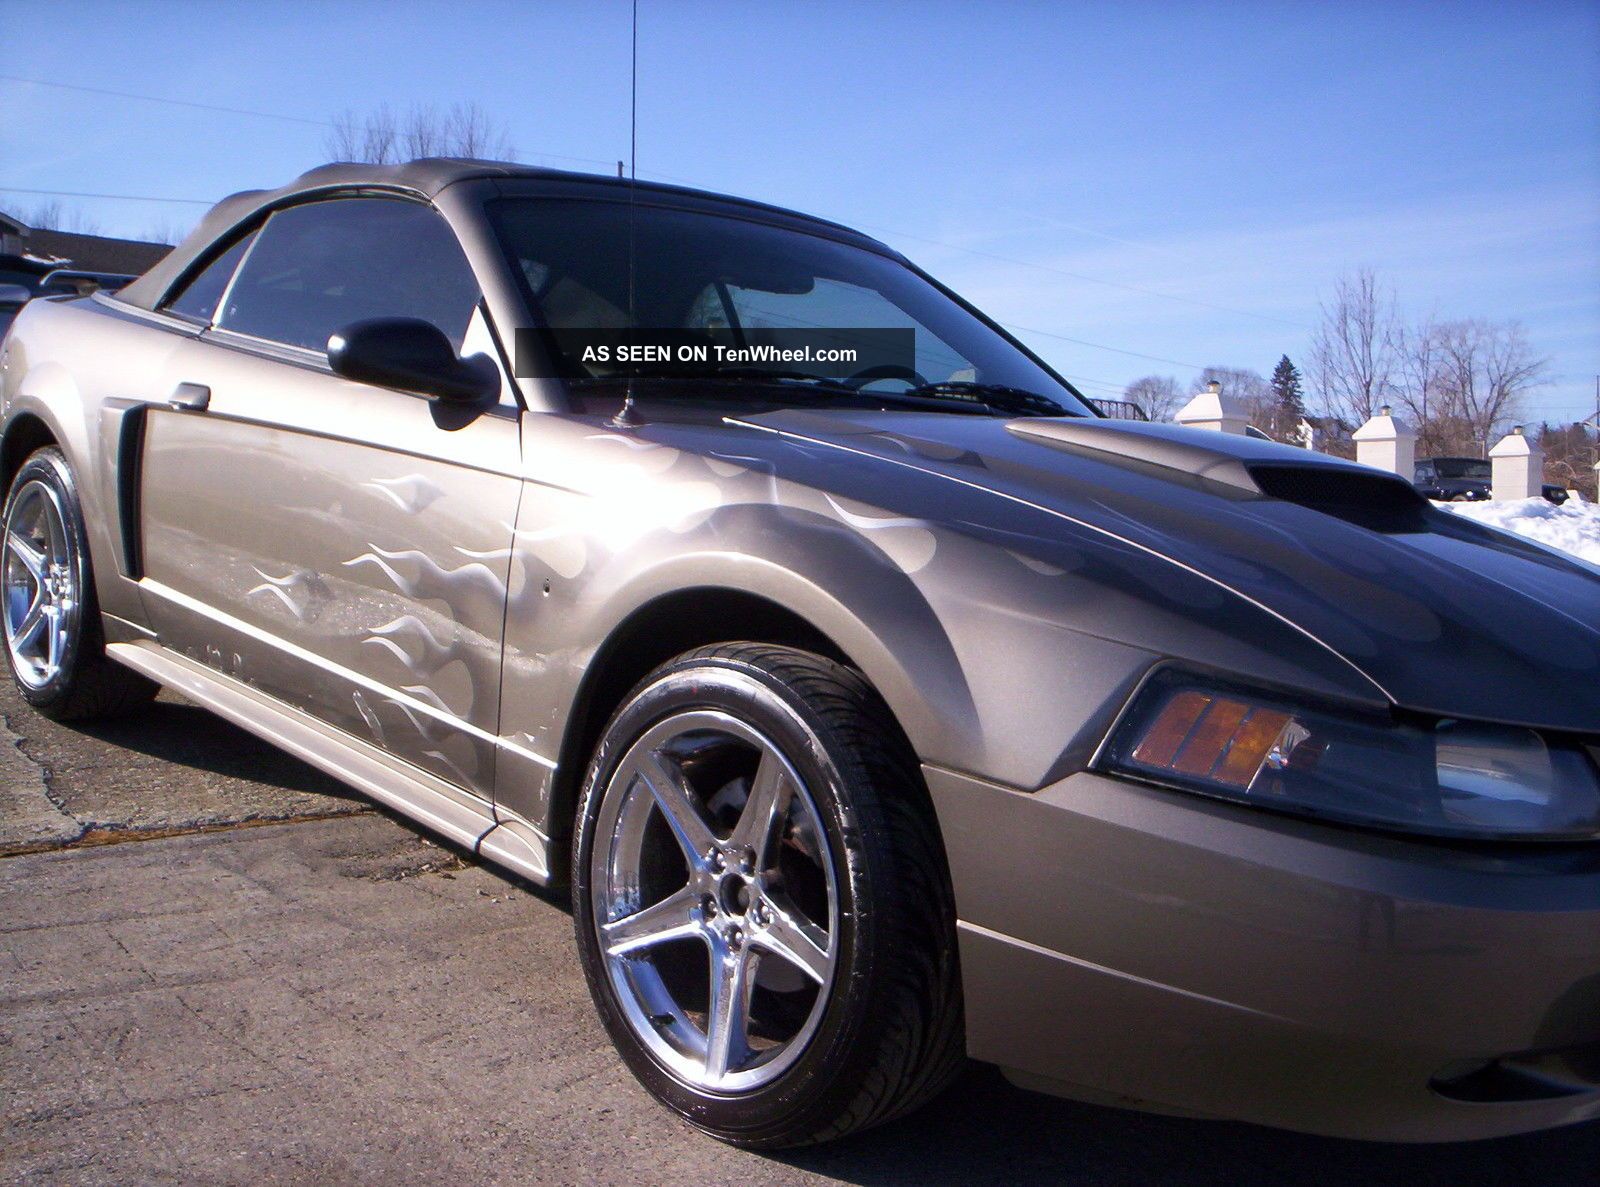 2002 Ford mustang convertible owners manual #2